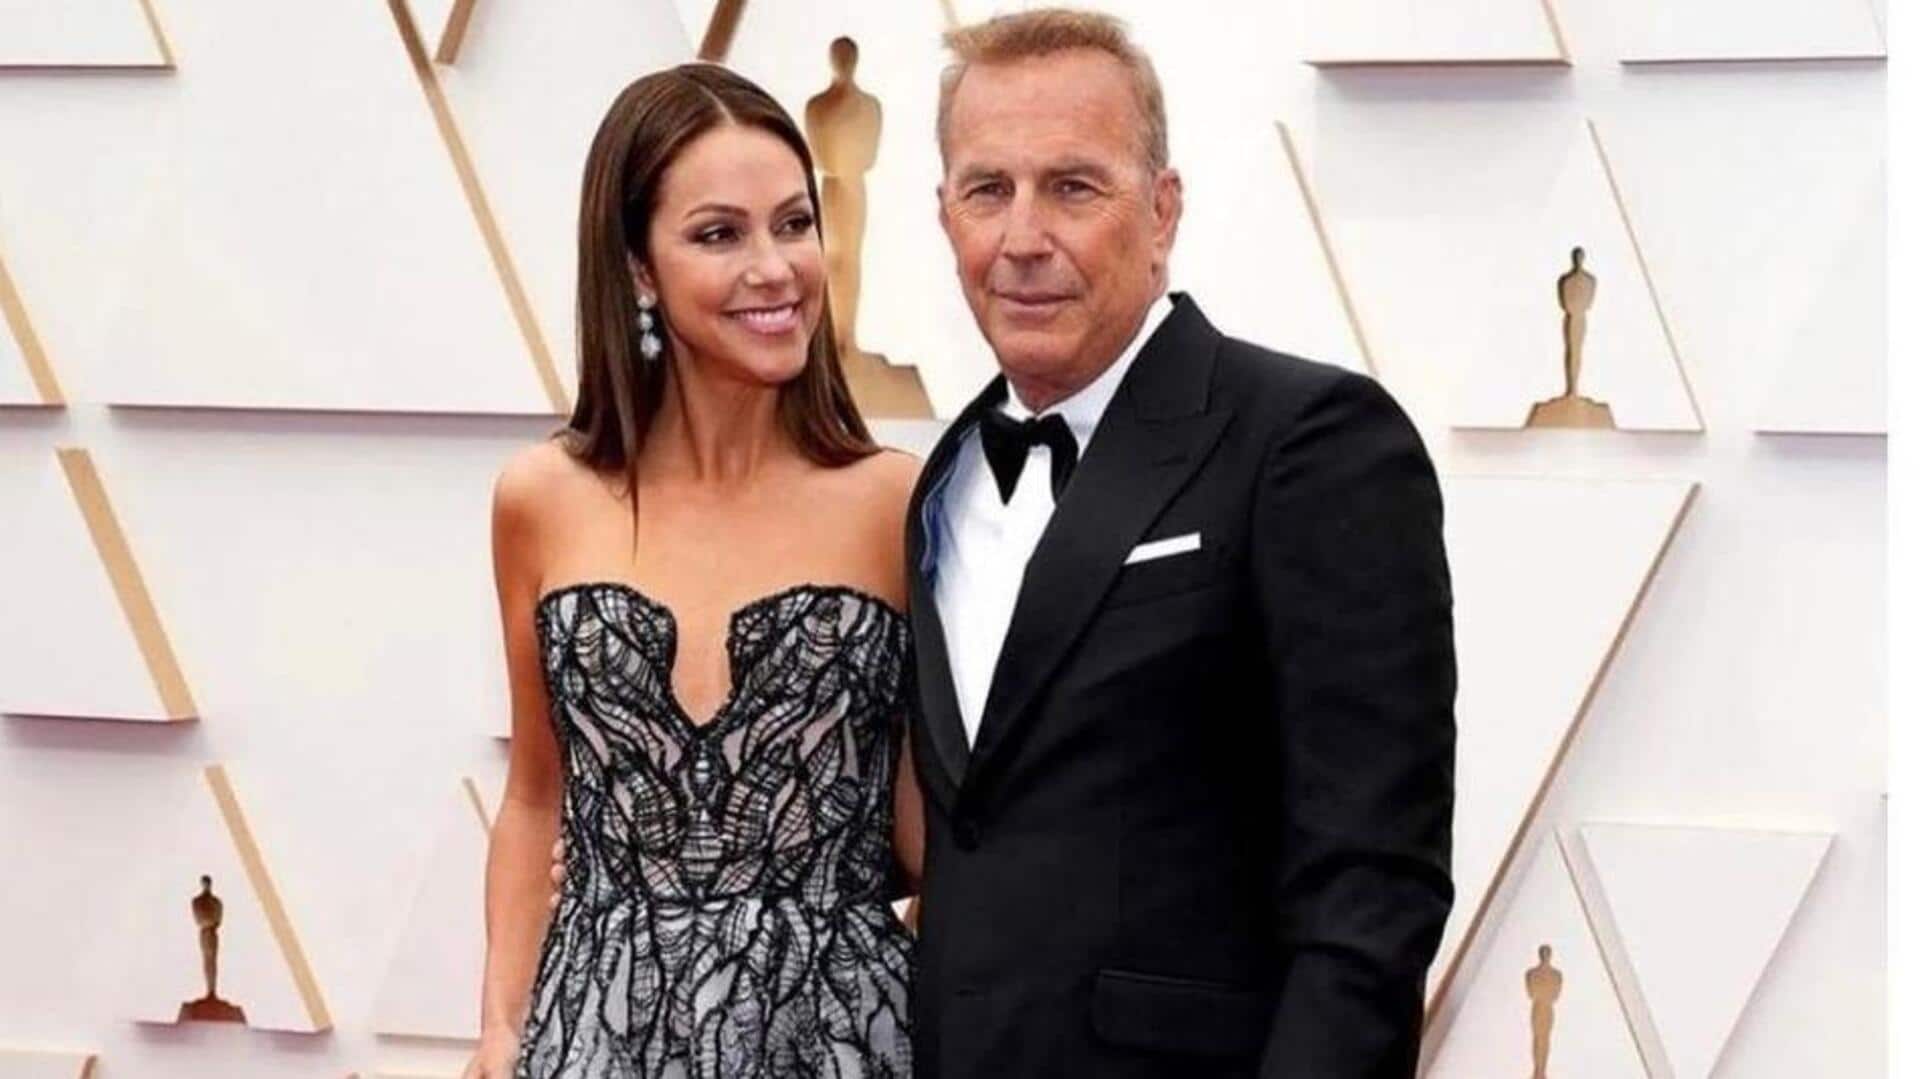 Kevin Costner gives deadline to estranged wife to vacate home